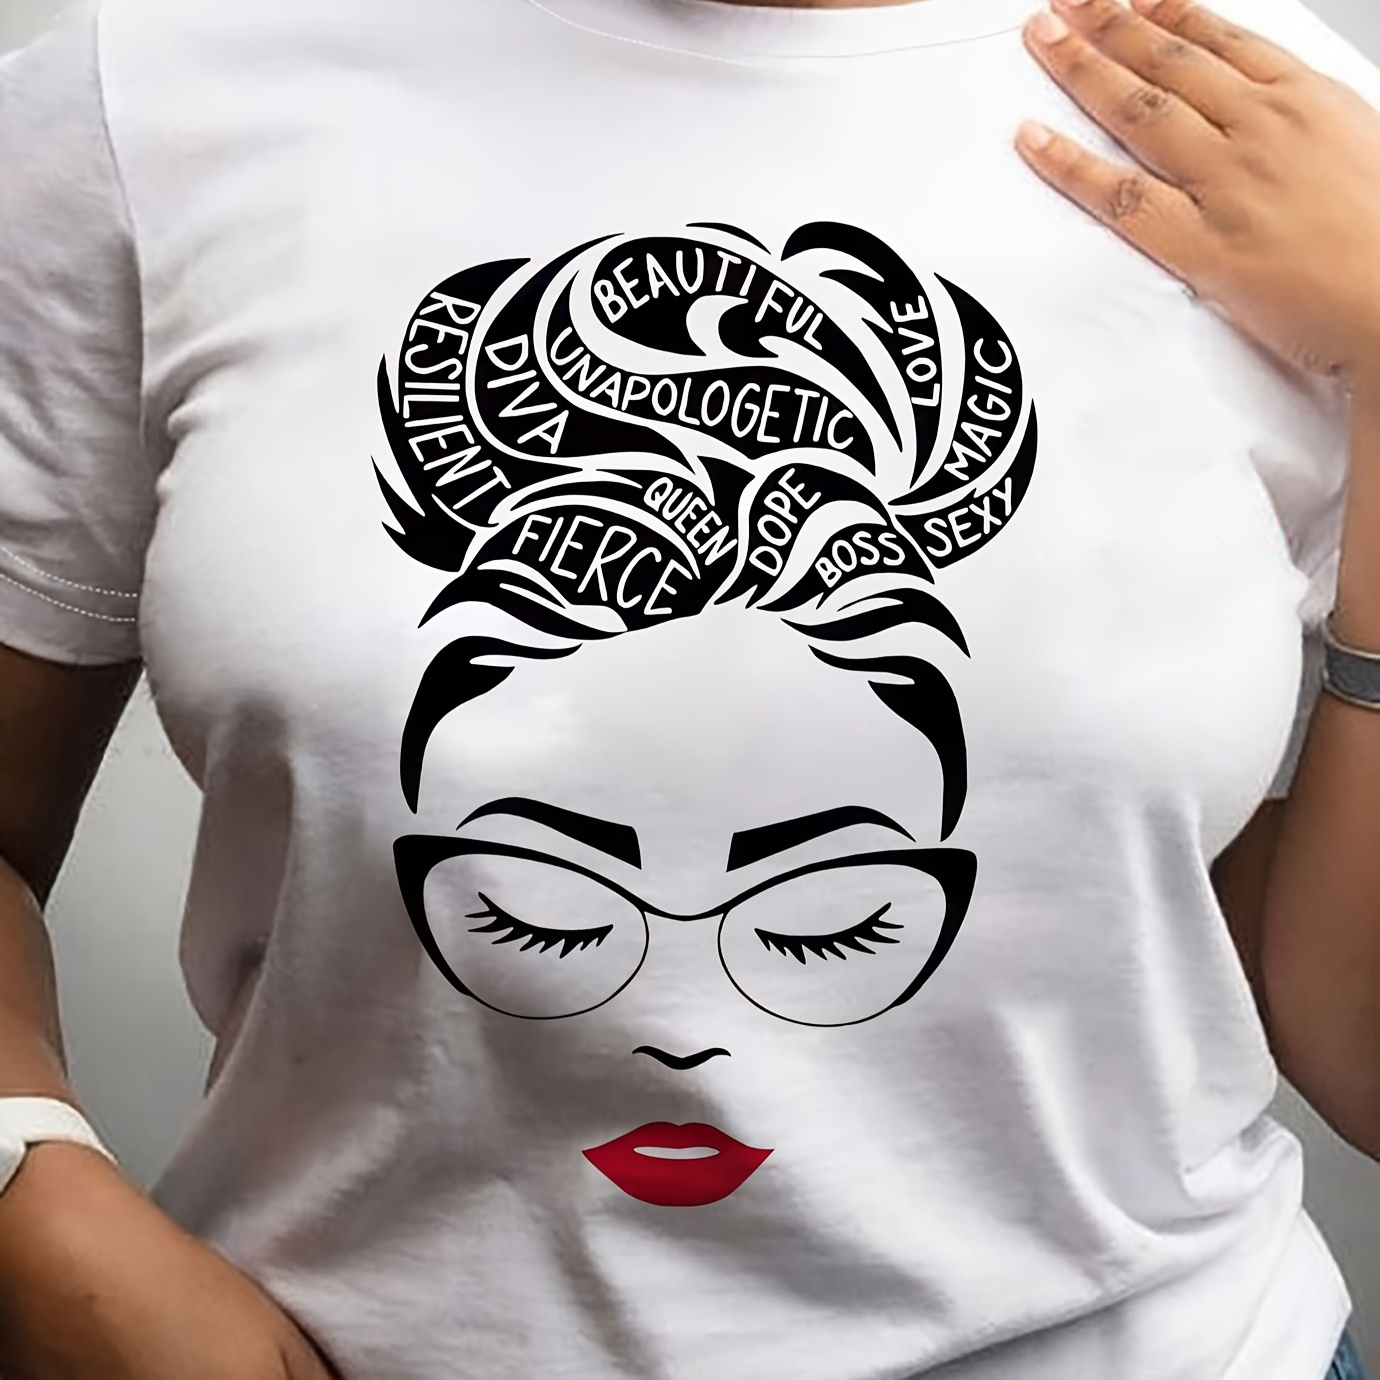 

Portrait Graphic Print T-shirt, Short Sleeve Crew Neck Casual Top For Summer & Spring, Women's Clothing